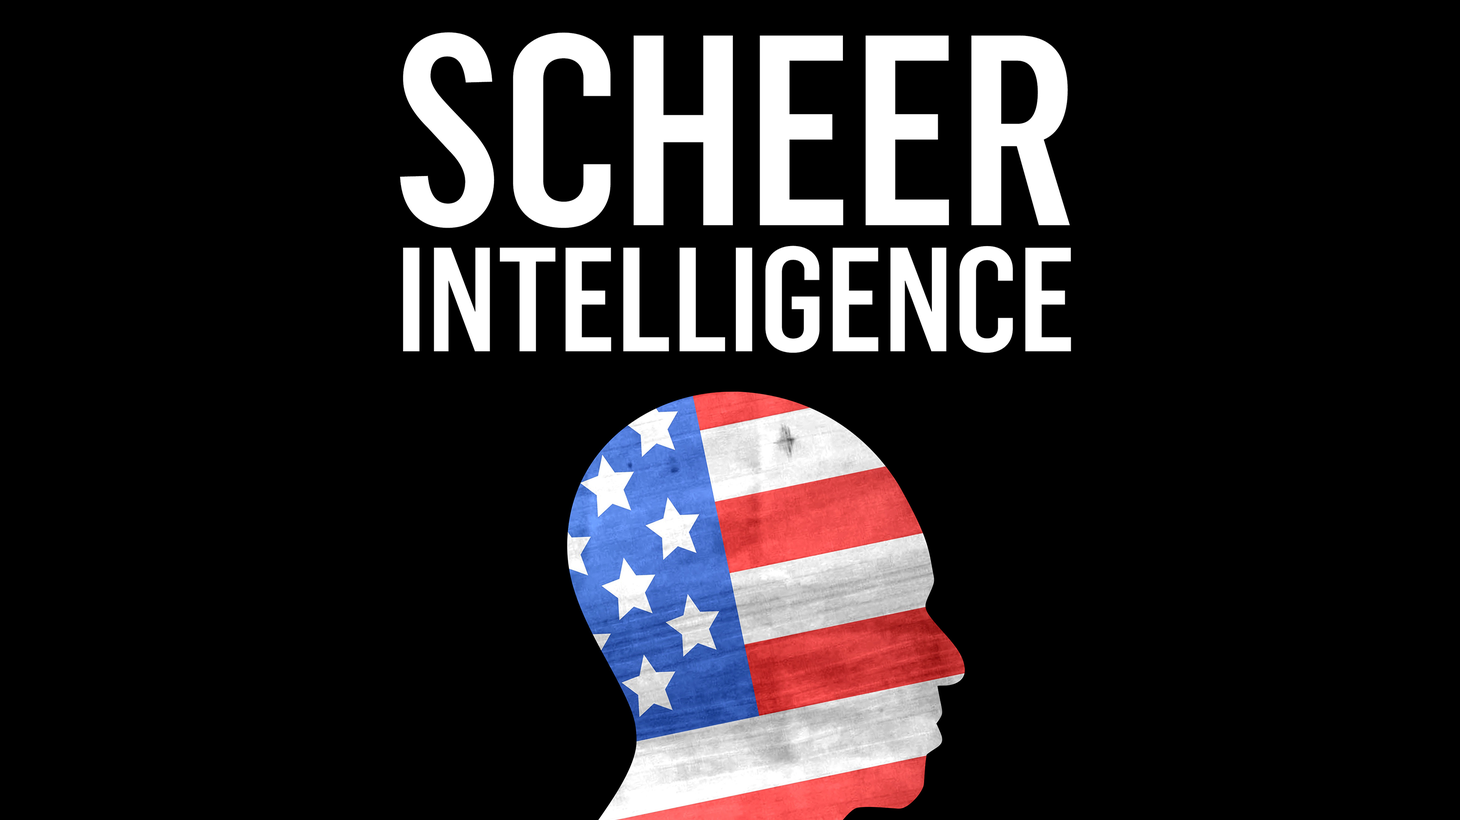 In this week’s Scheer Intelligence, Robert Scheer sits down with immigration rights activist Lizbeth Mateo to discuss what should be done for immigrants and her own status.